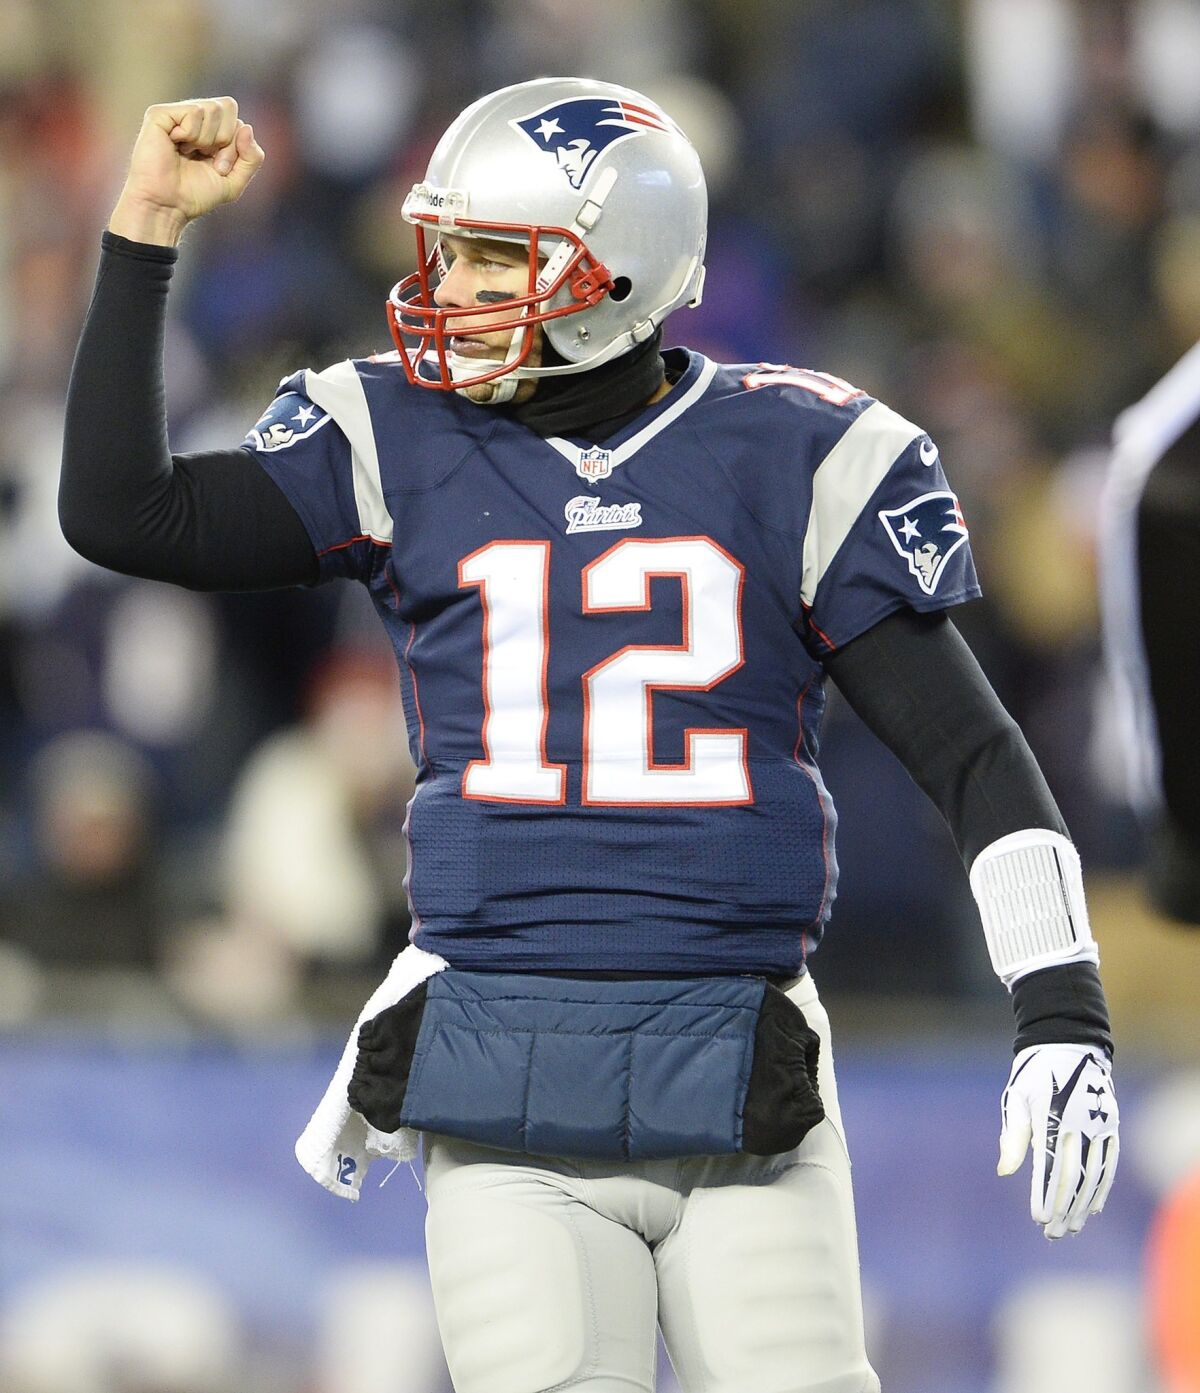 New England quarterback Tom Brady celebrates a touchdown during the Patriots' 34-31 comeback victory over the Denver Broncos at Gillette Stadium in Foxborough, Mass.